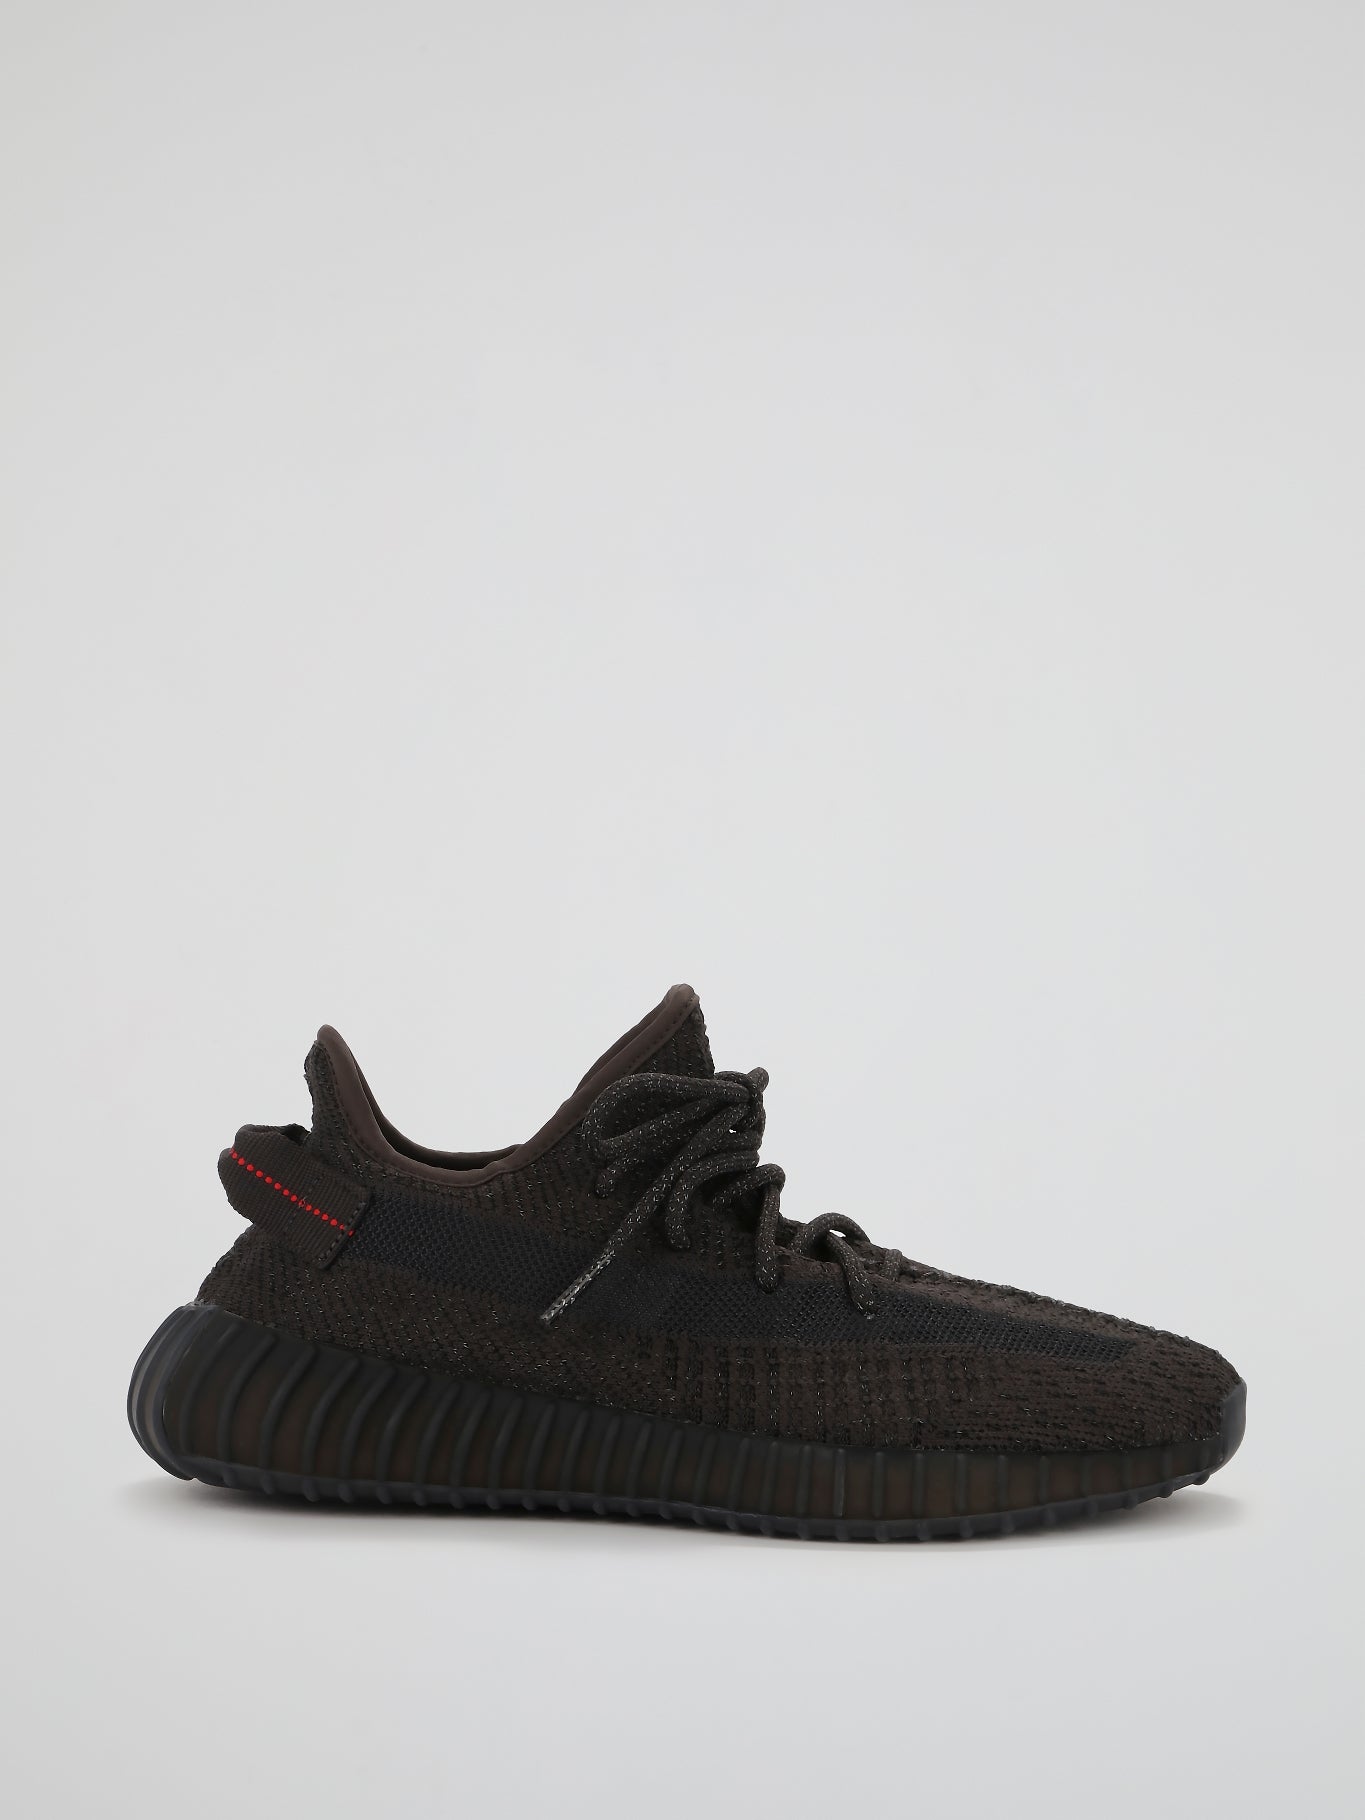 nadar A la meditación Guinness Shop Adidas Yeezy Boost 350 V2 Static Black Reflective Sneakers, size 7.5  Online – Maison-B-More Global Store